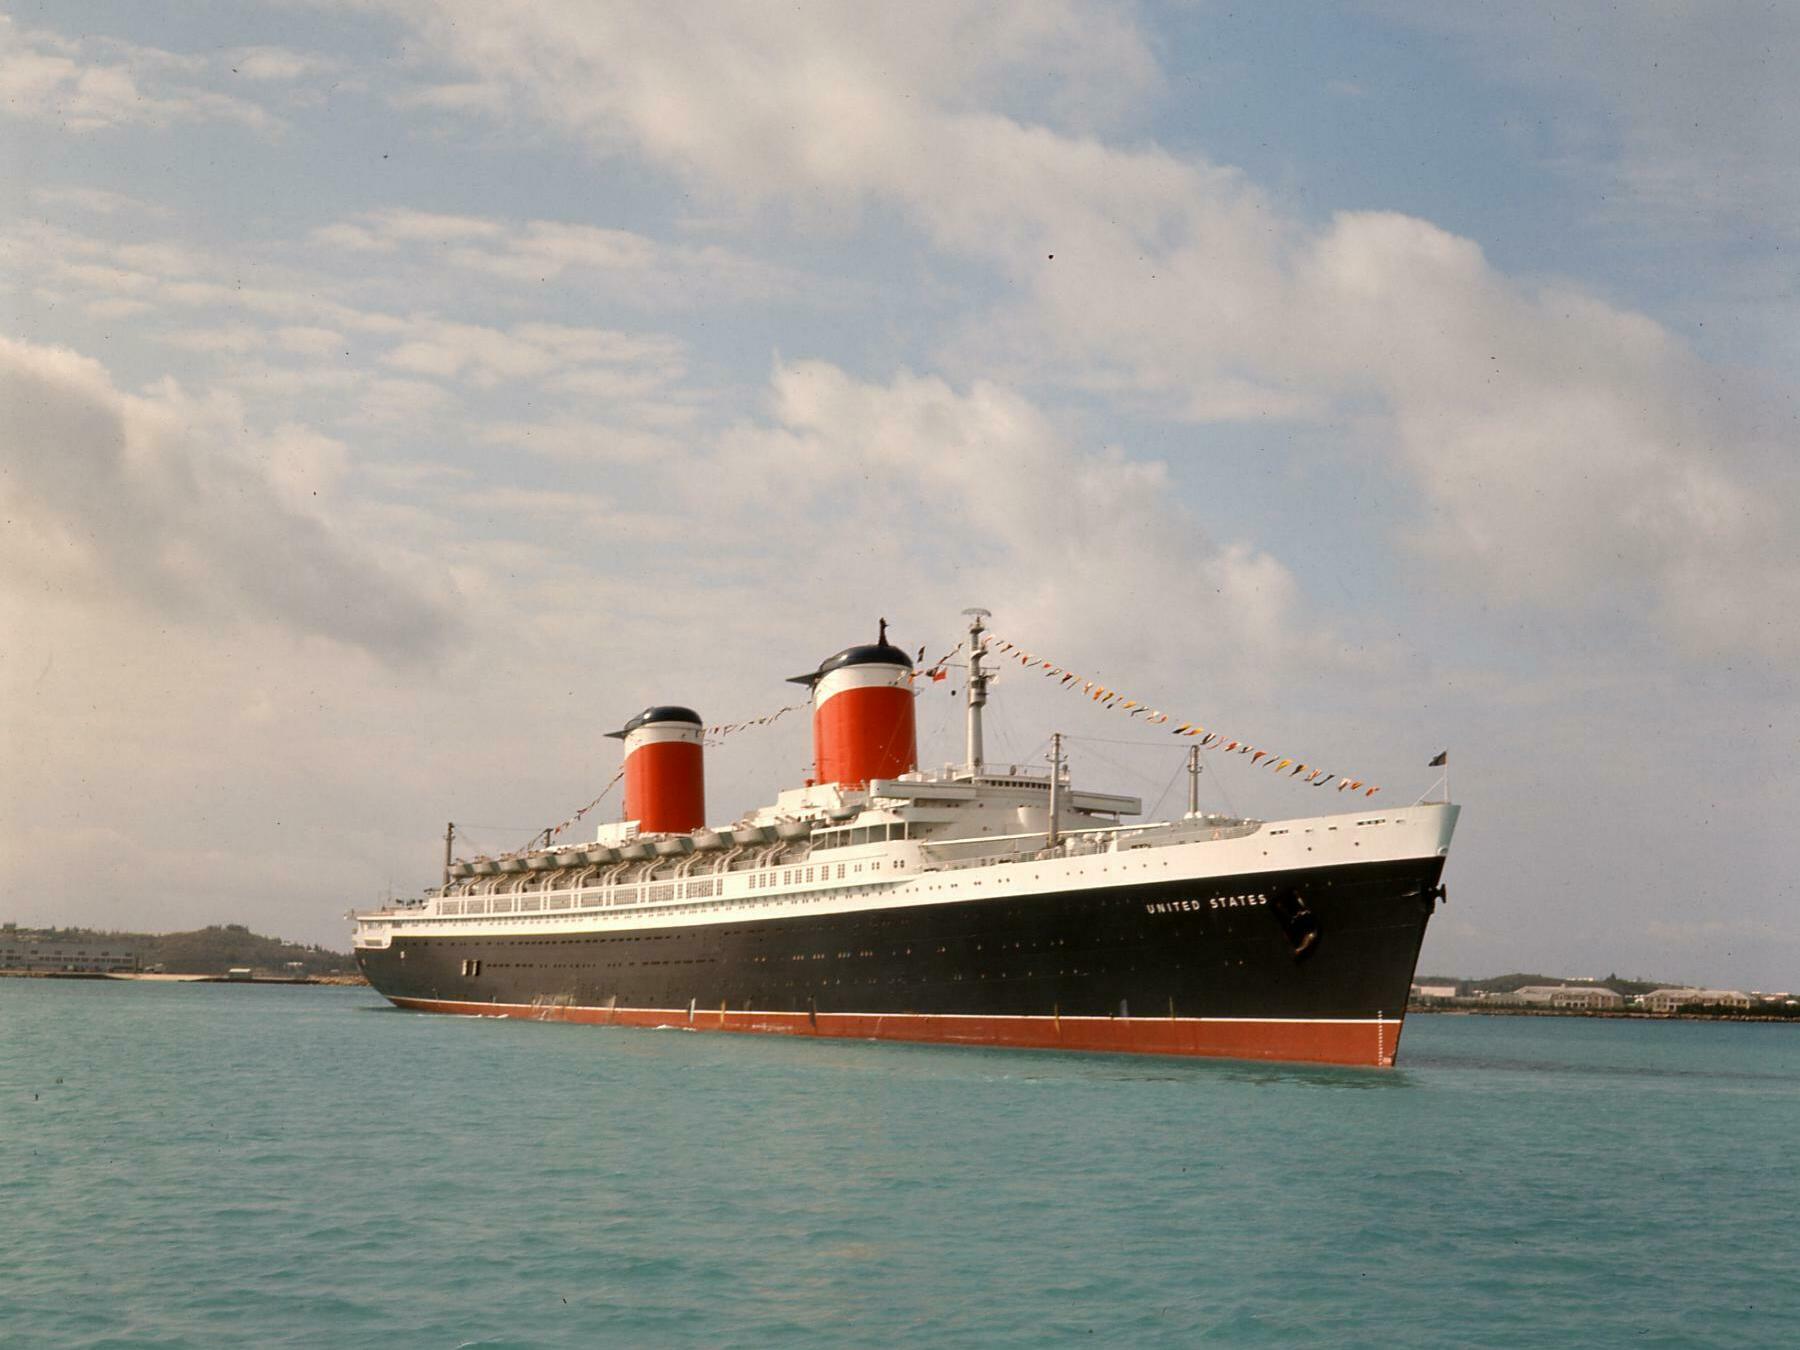 The fastest ocean liner to cross the Atlantic faces eviction from a pier